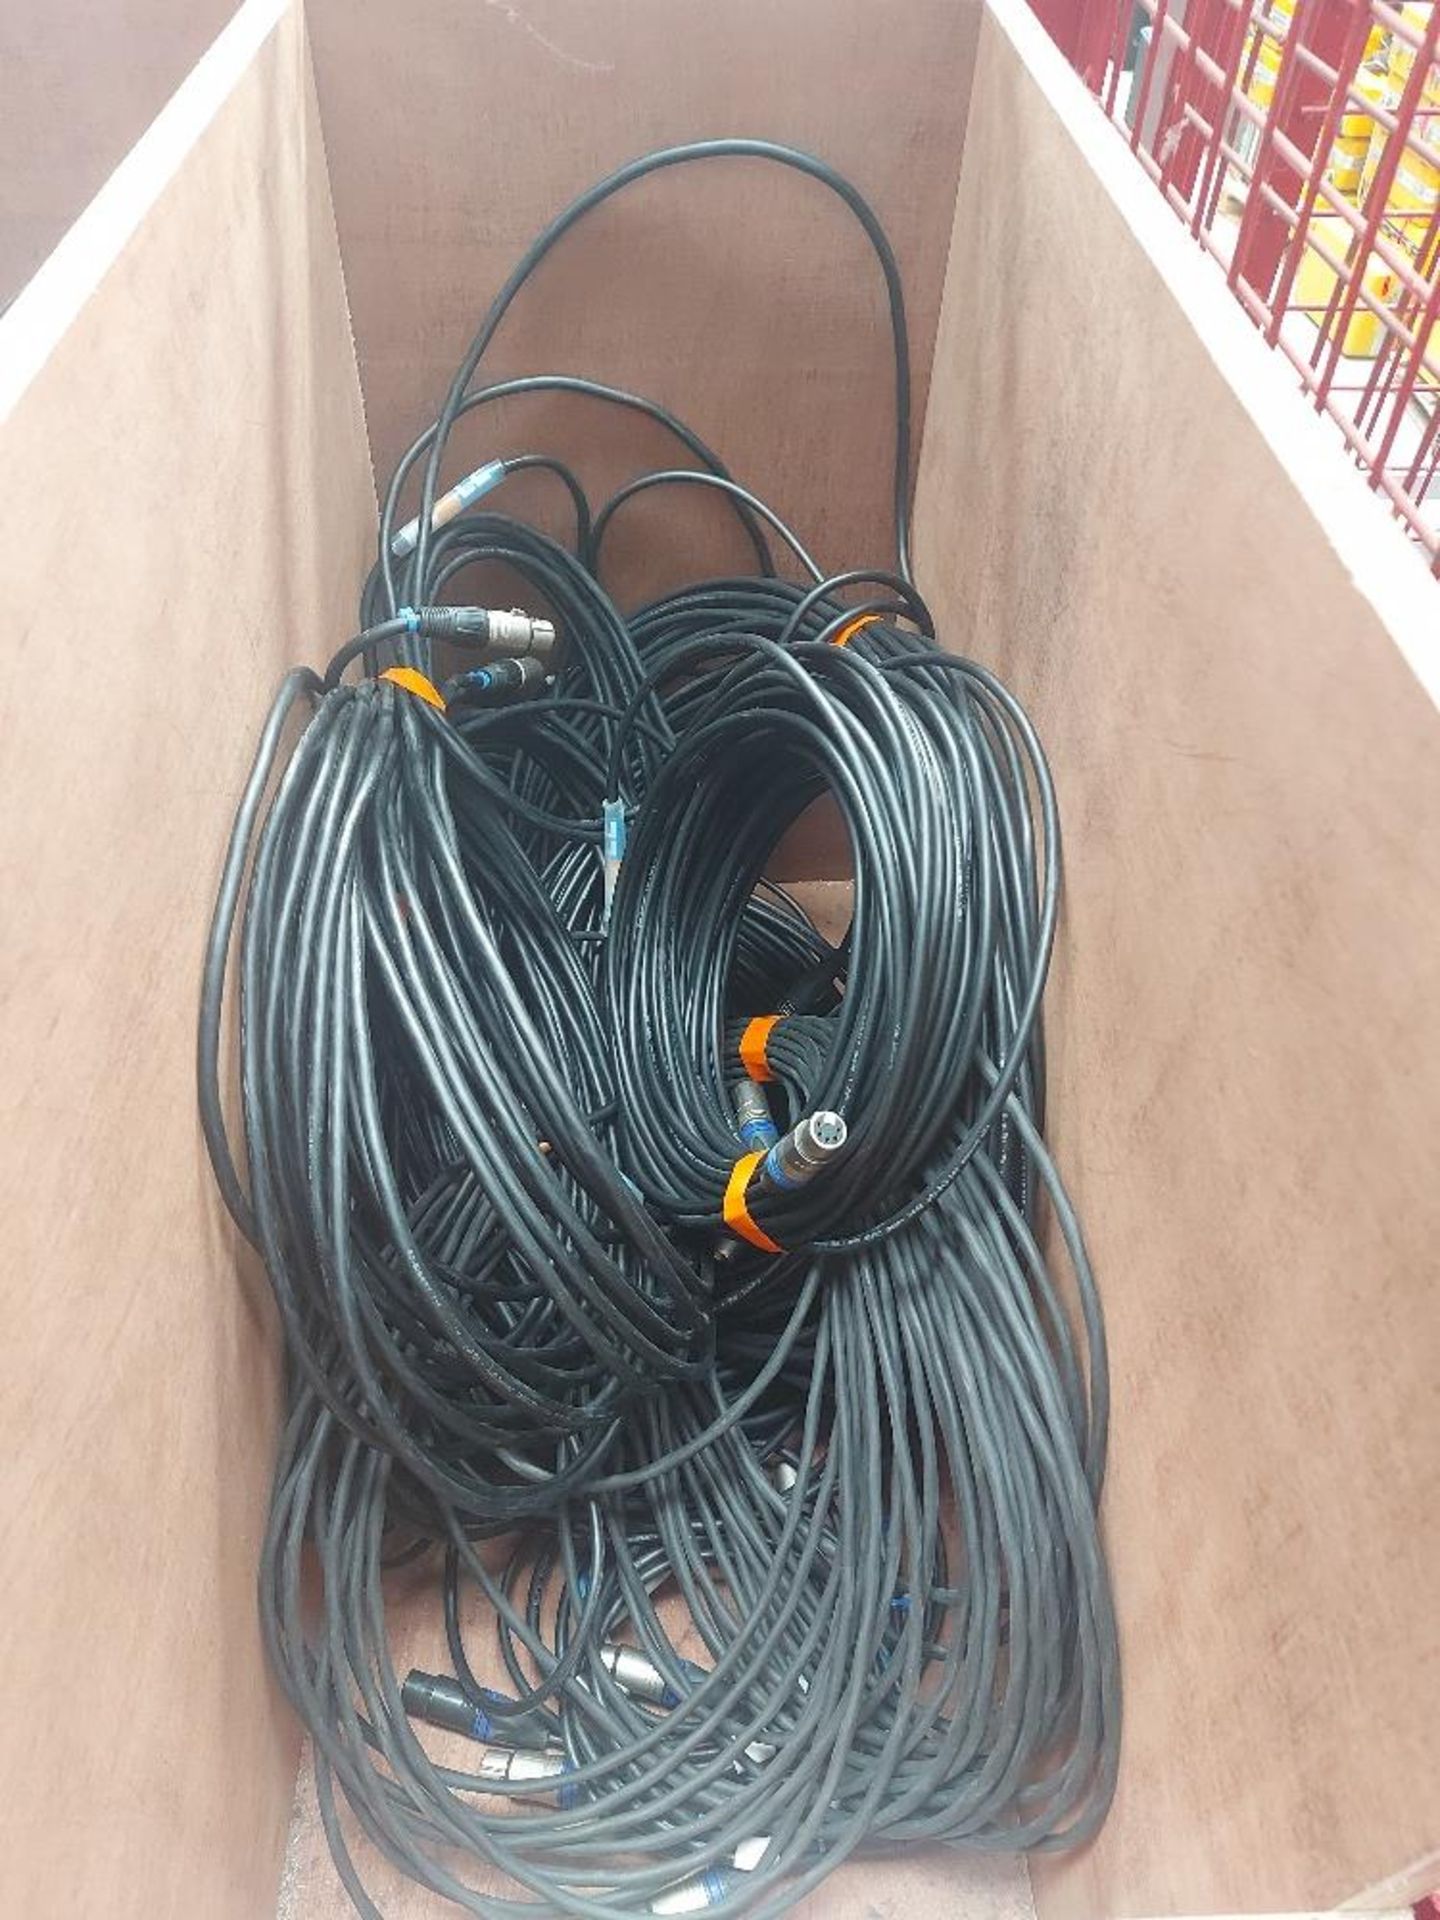 Large Quantity of 50m 5-Pin DMX Cable M-F & 30m 5-Pin DMX Cable M-F with Steel Fabricated Stillage - Image 2 of 6